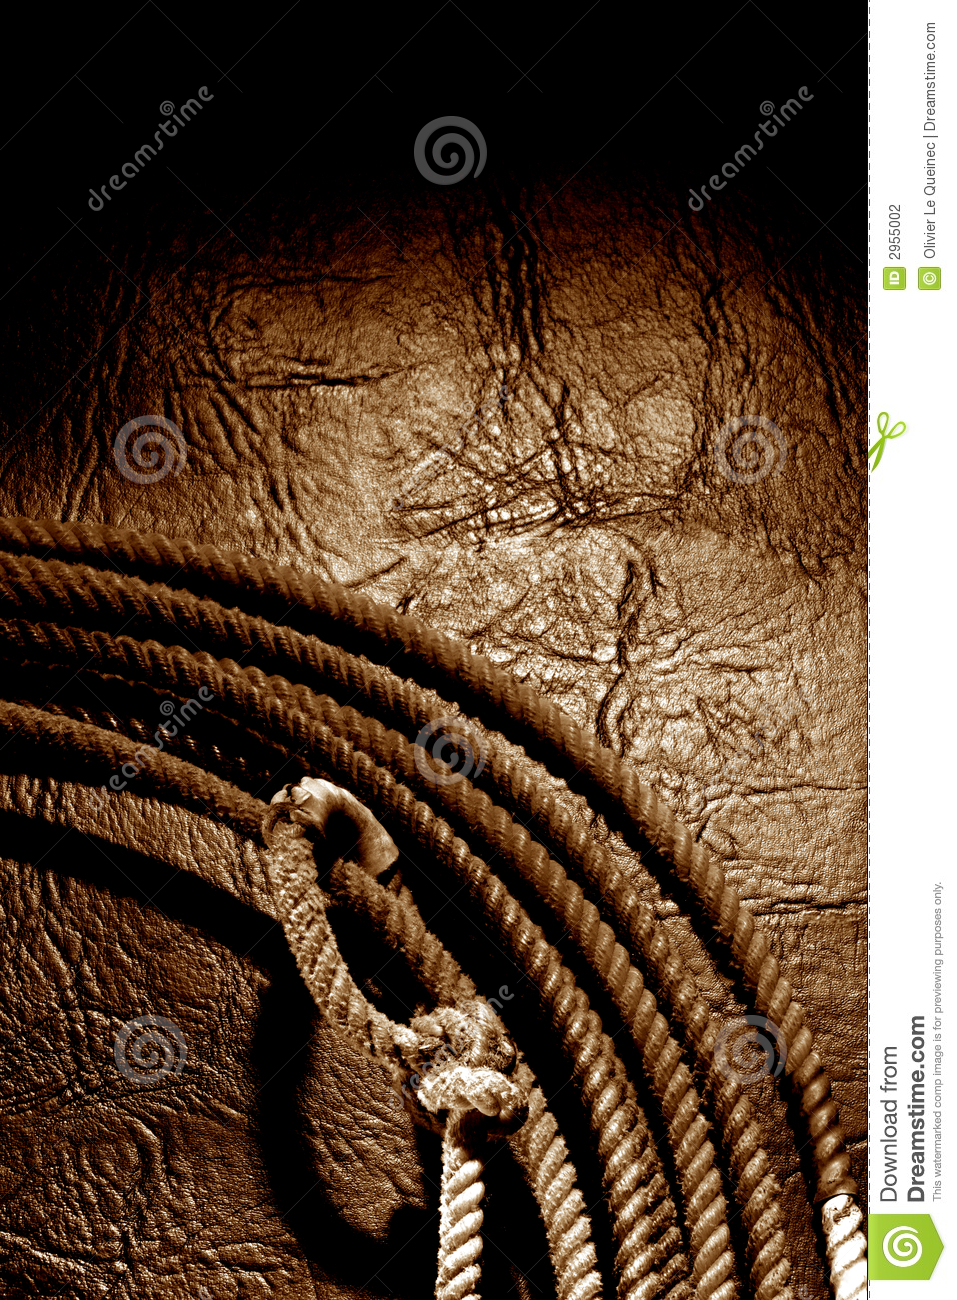 Western Leather Backgrounds Grunge leather background